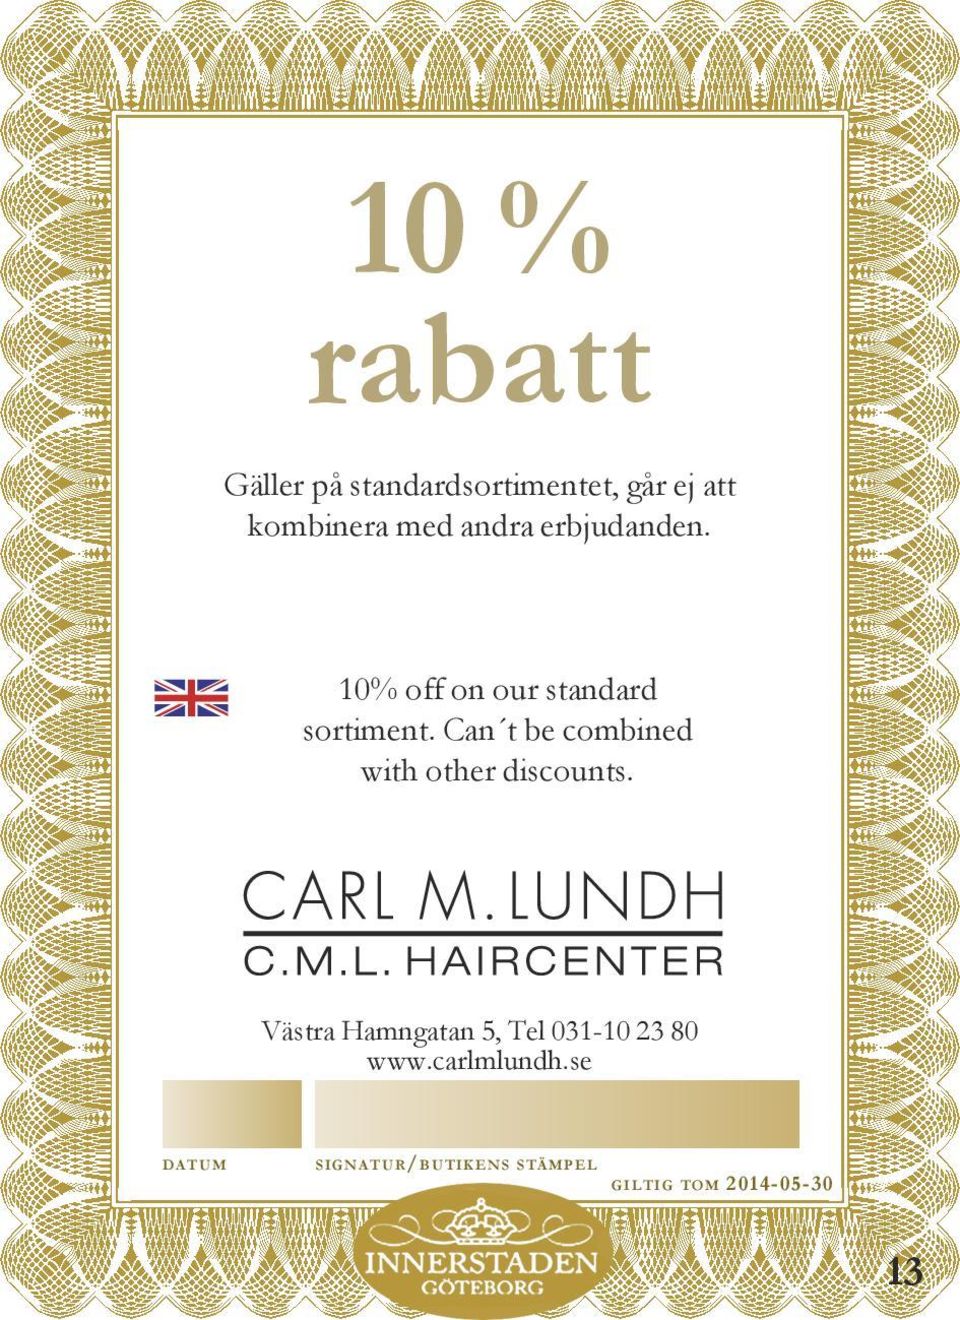 10% off on our standard sortiment.